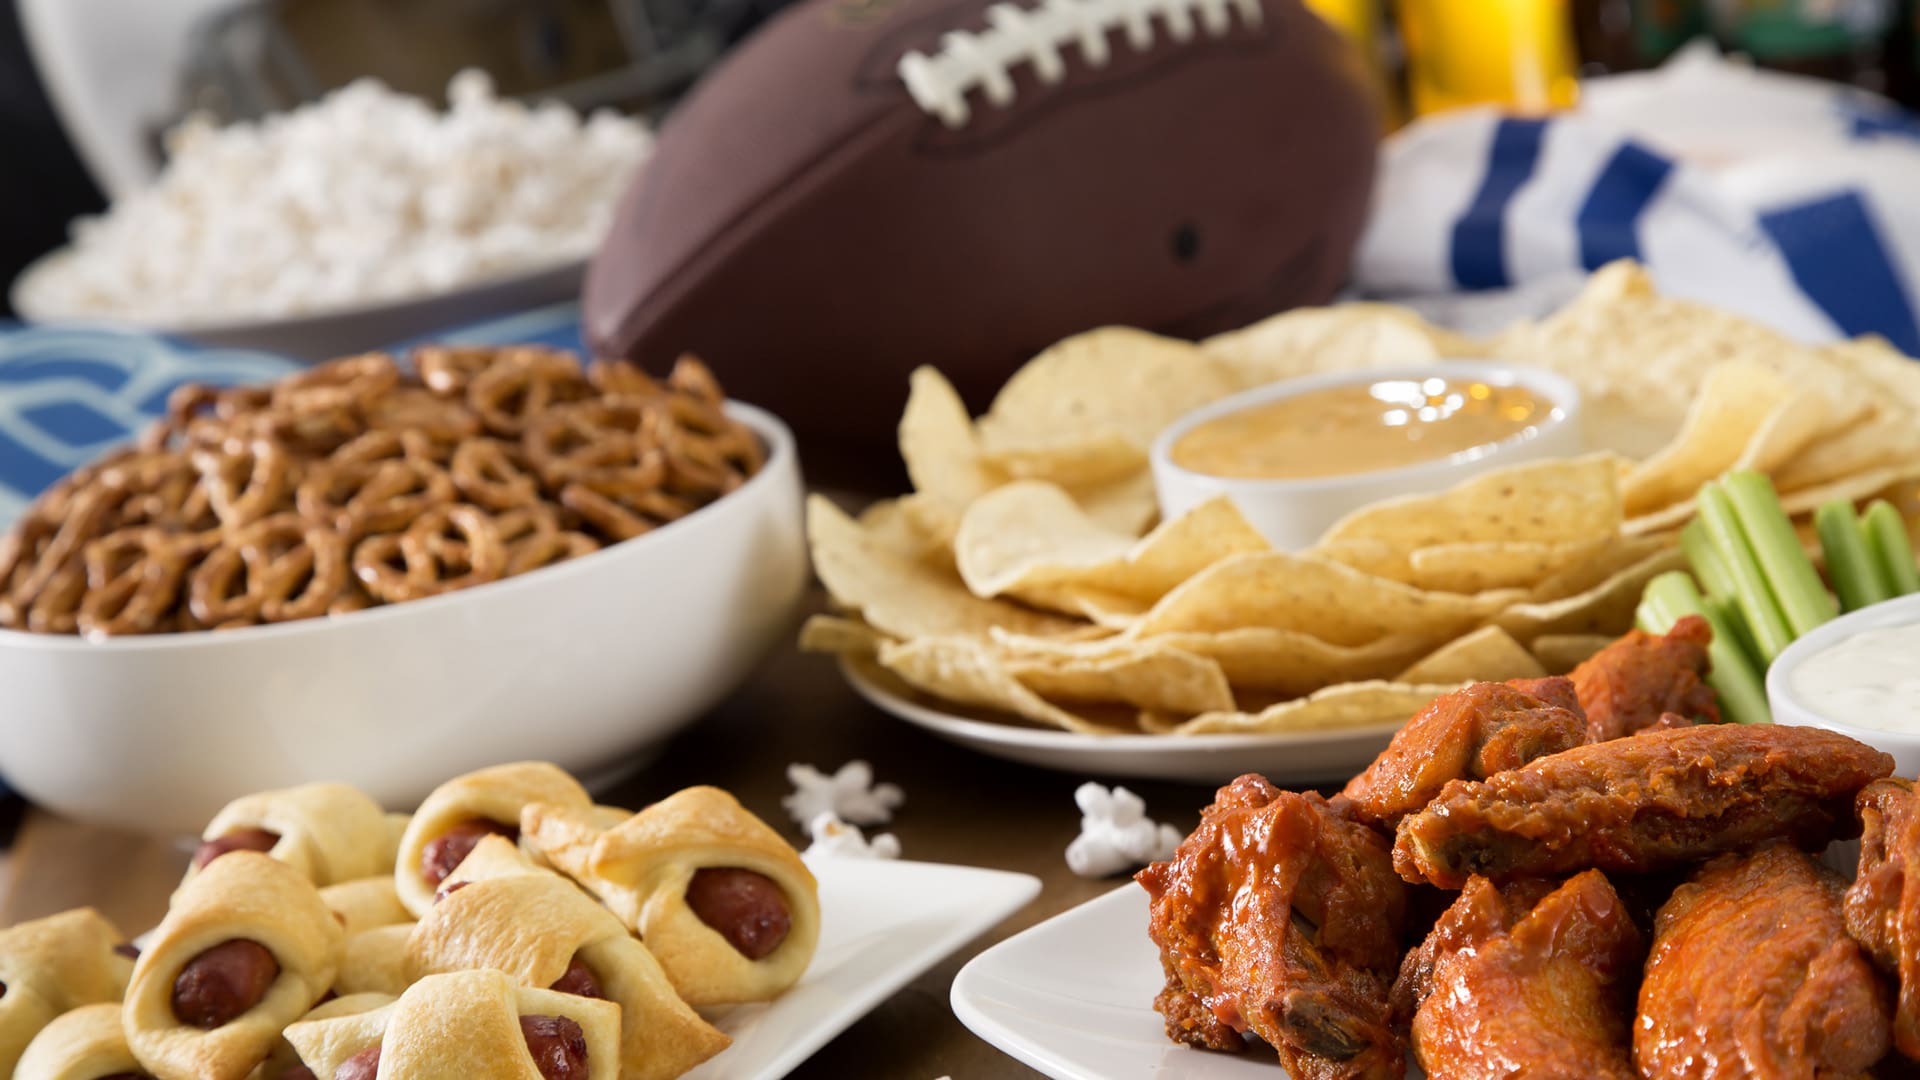 Hot wings, nachos, pigs in a blanket, beer, and popcorn, a tailgate party spread.